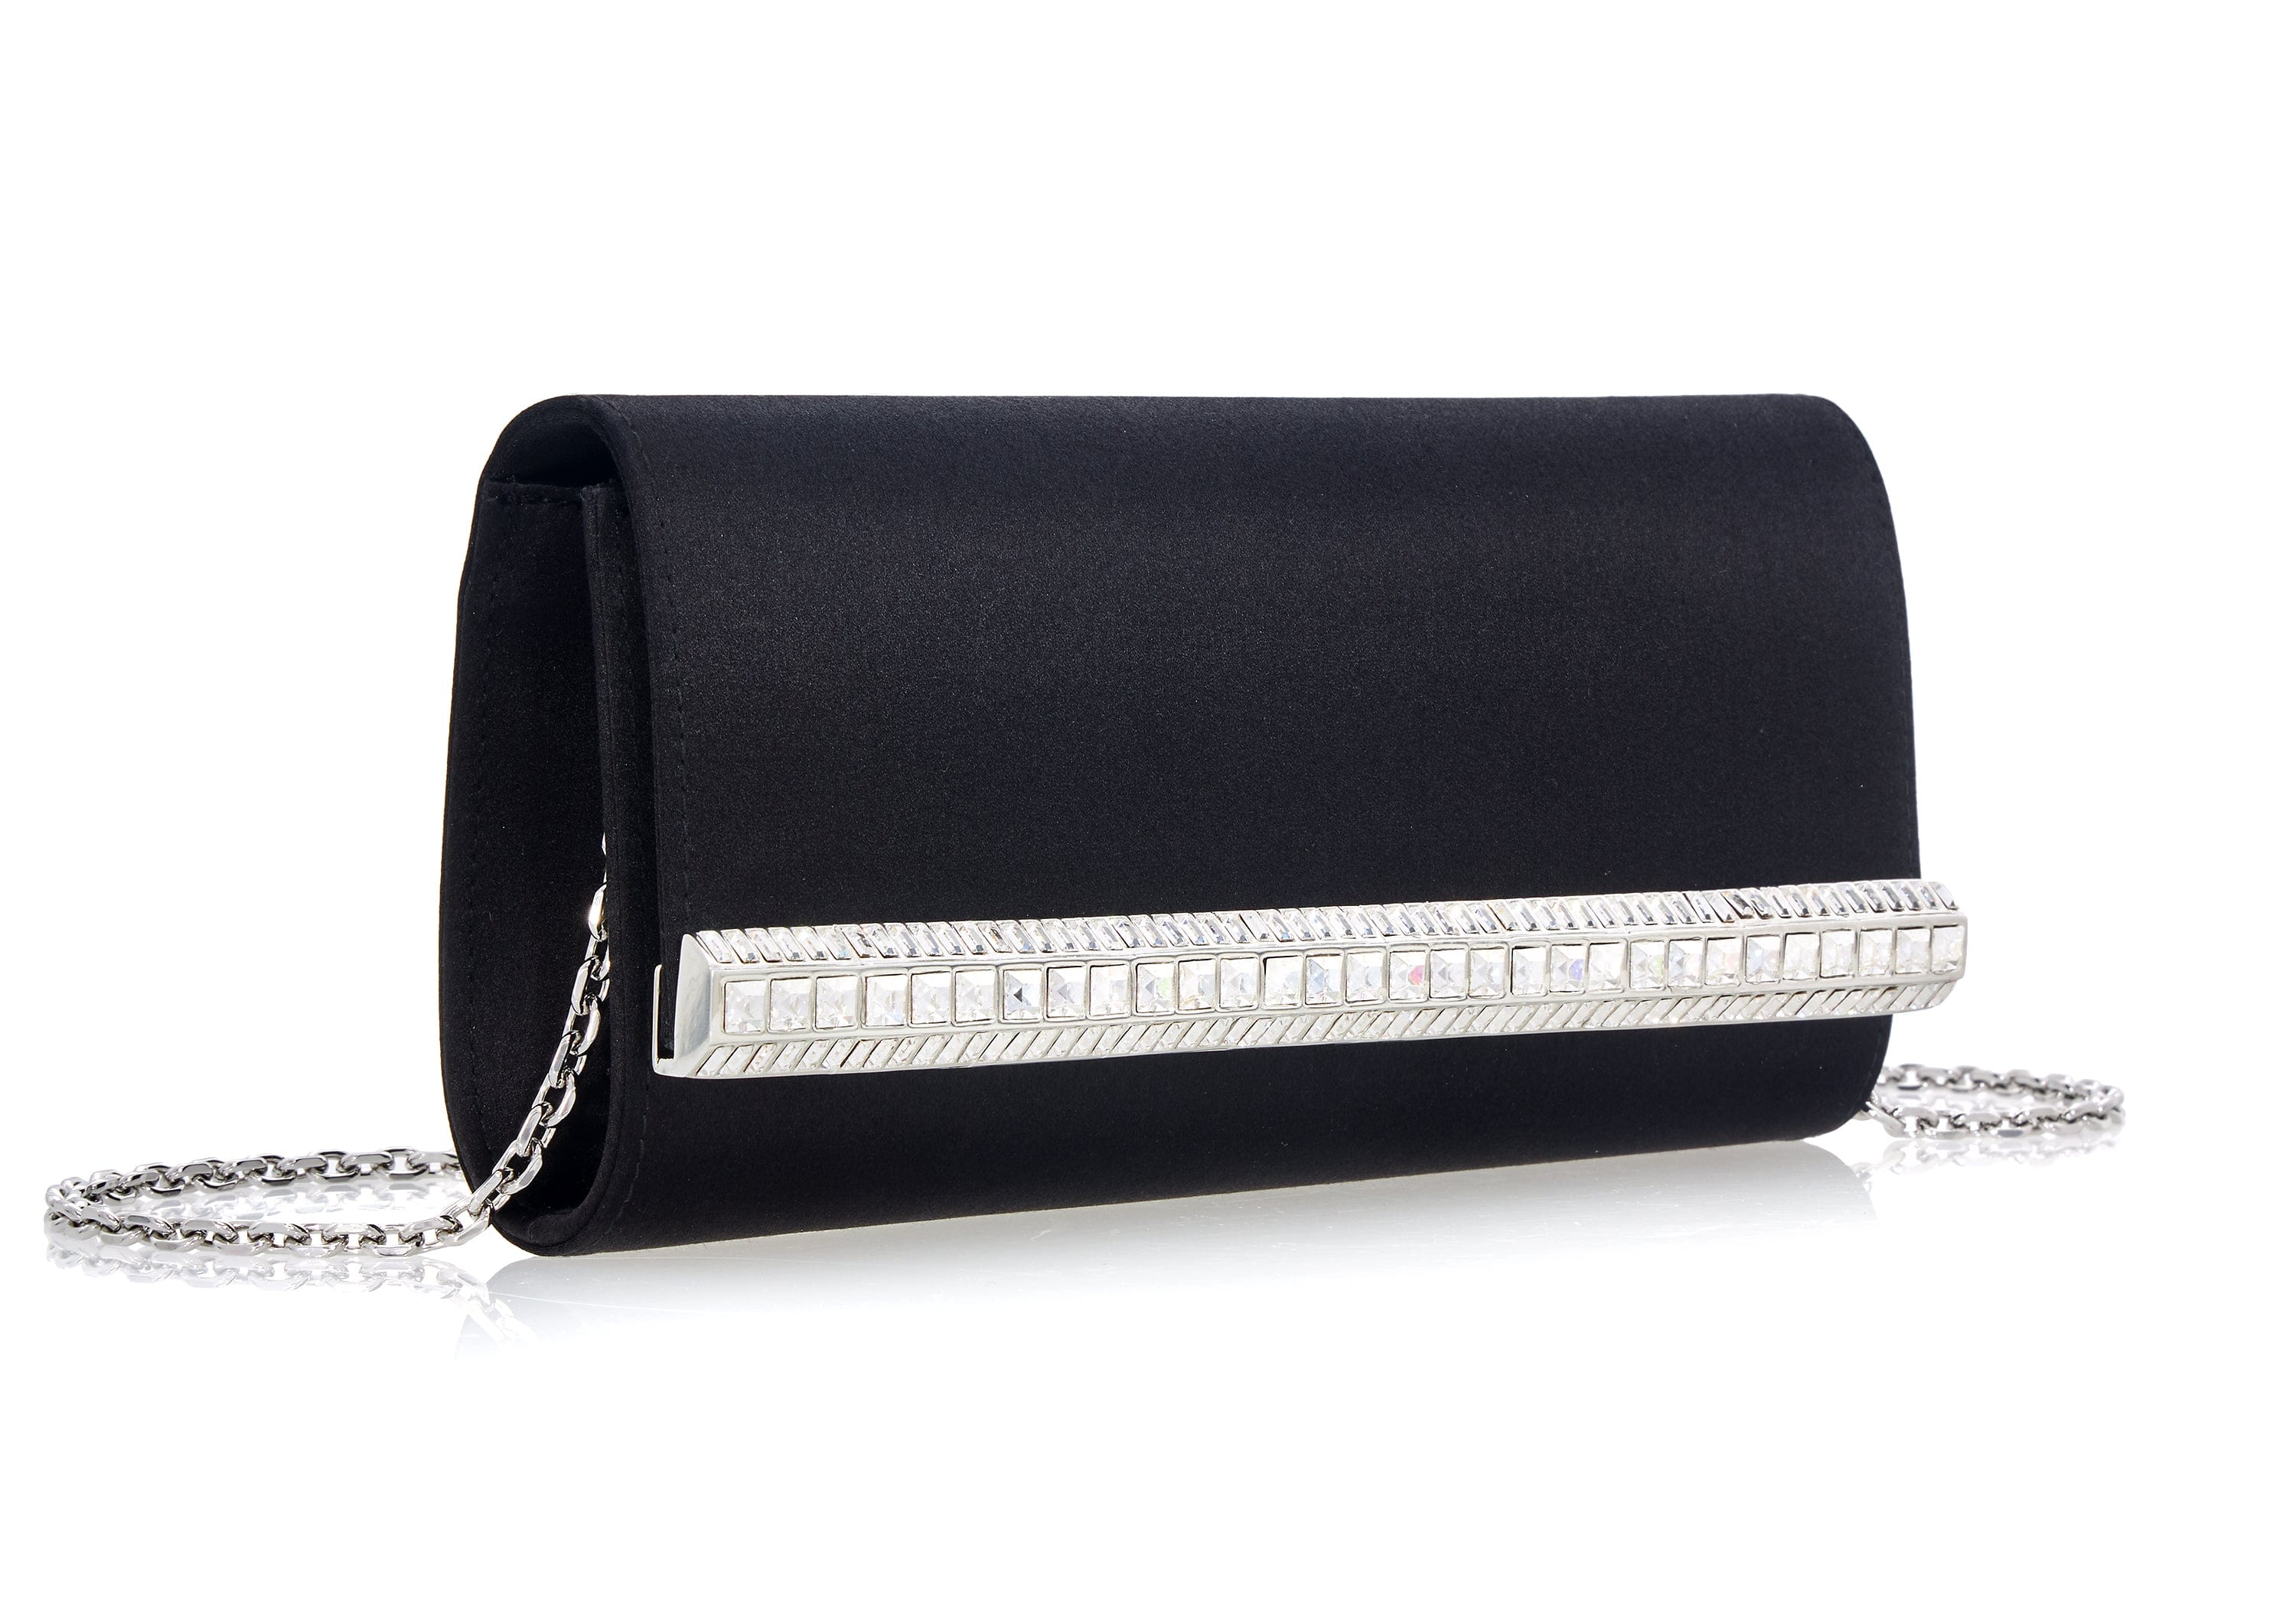 Judith Leiber Couture Crystal Bow Envelope Clutch Bag